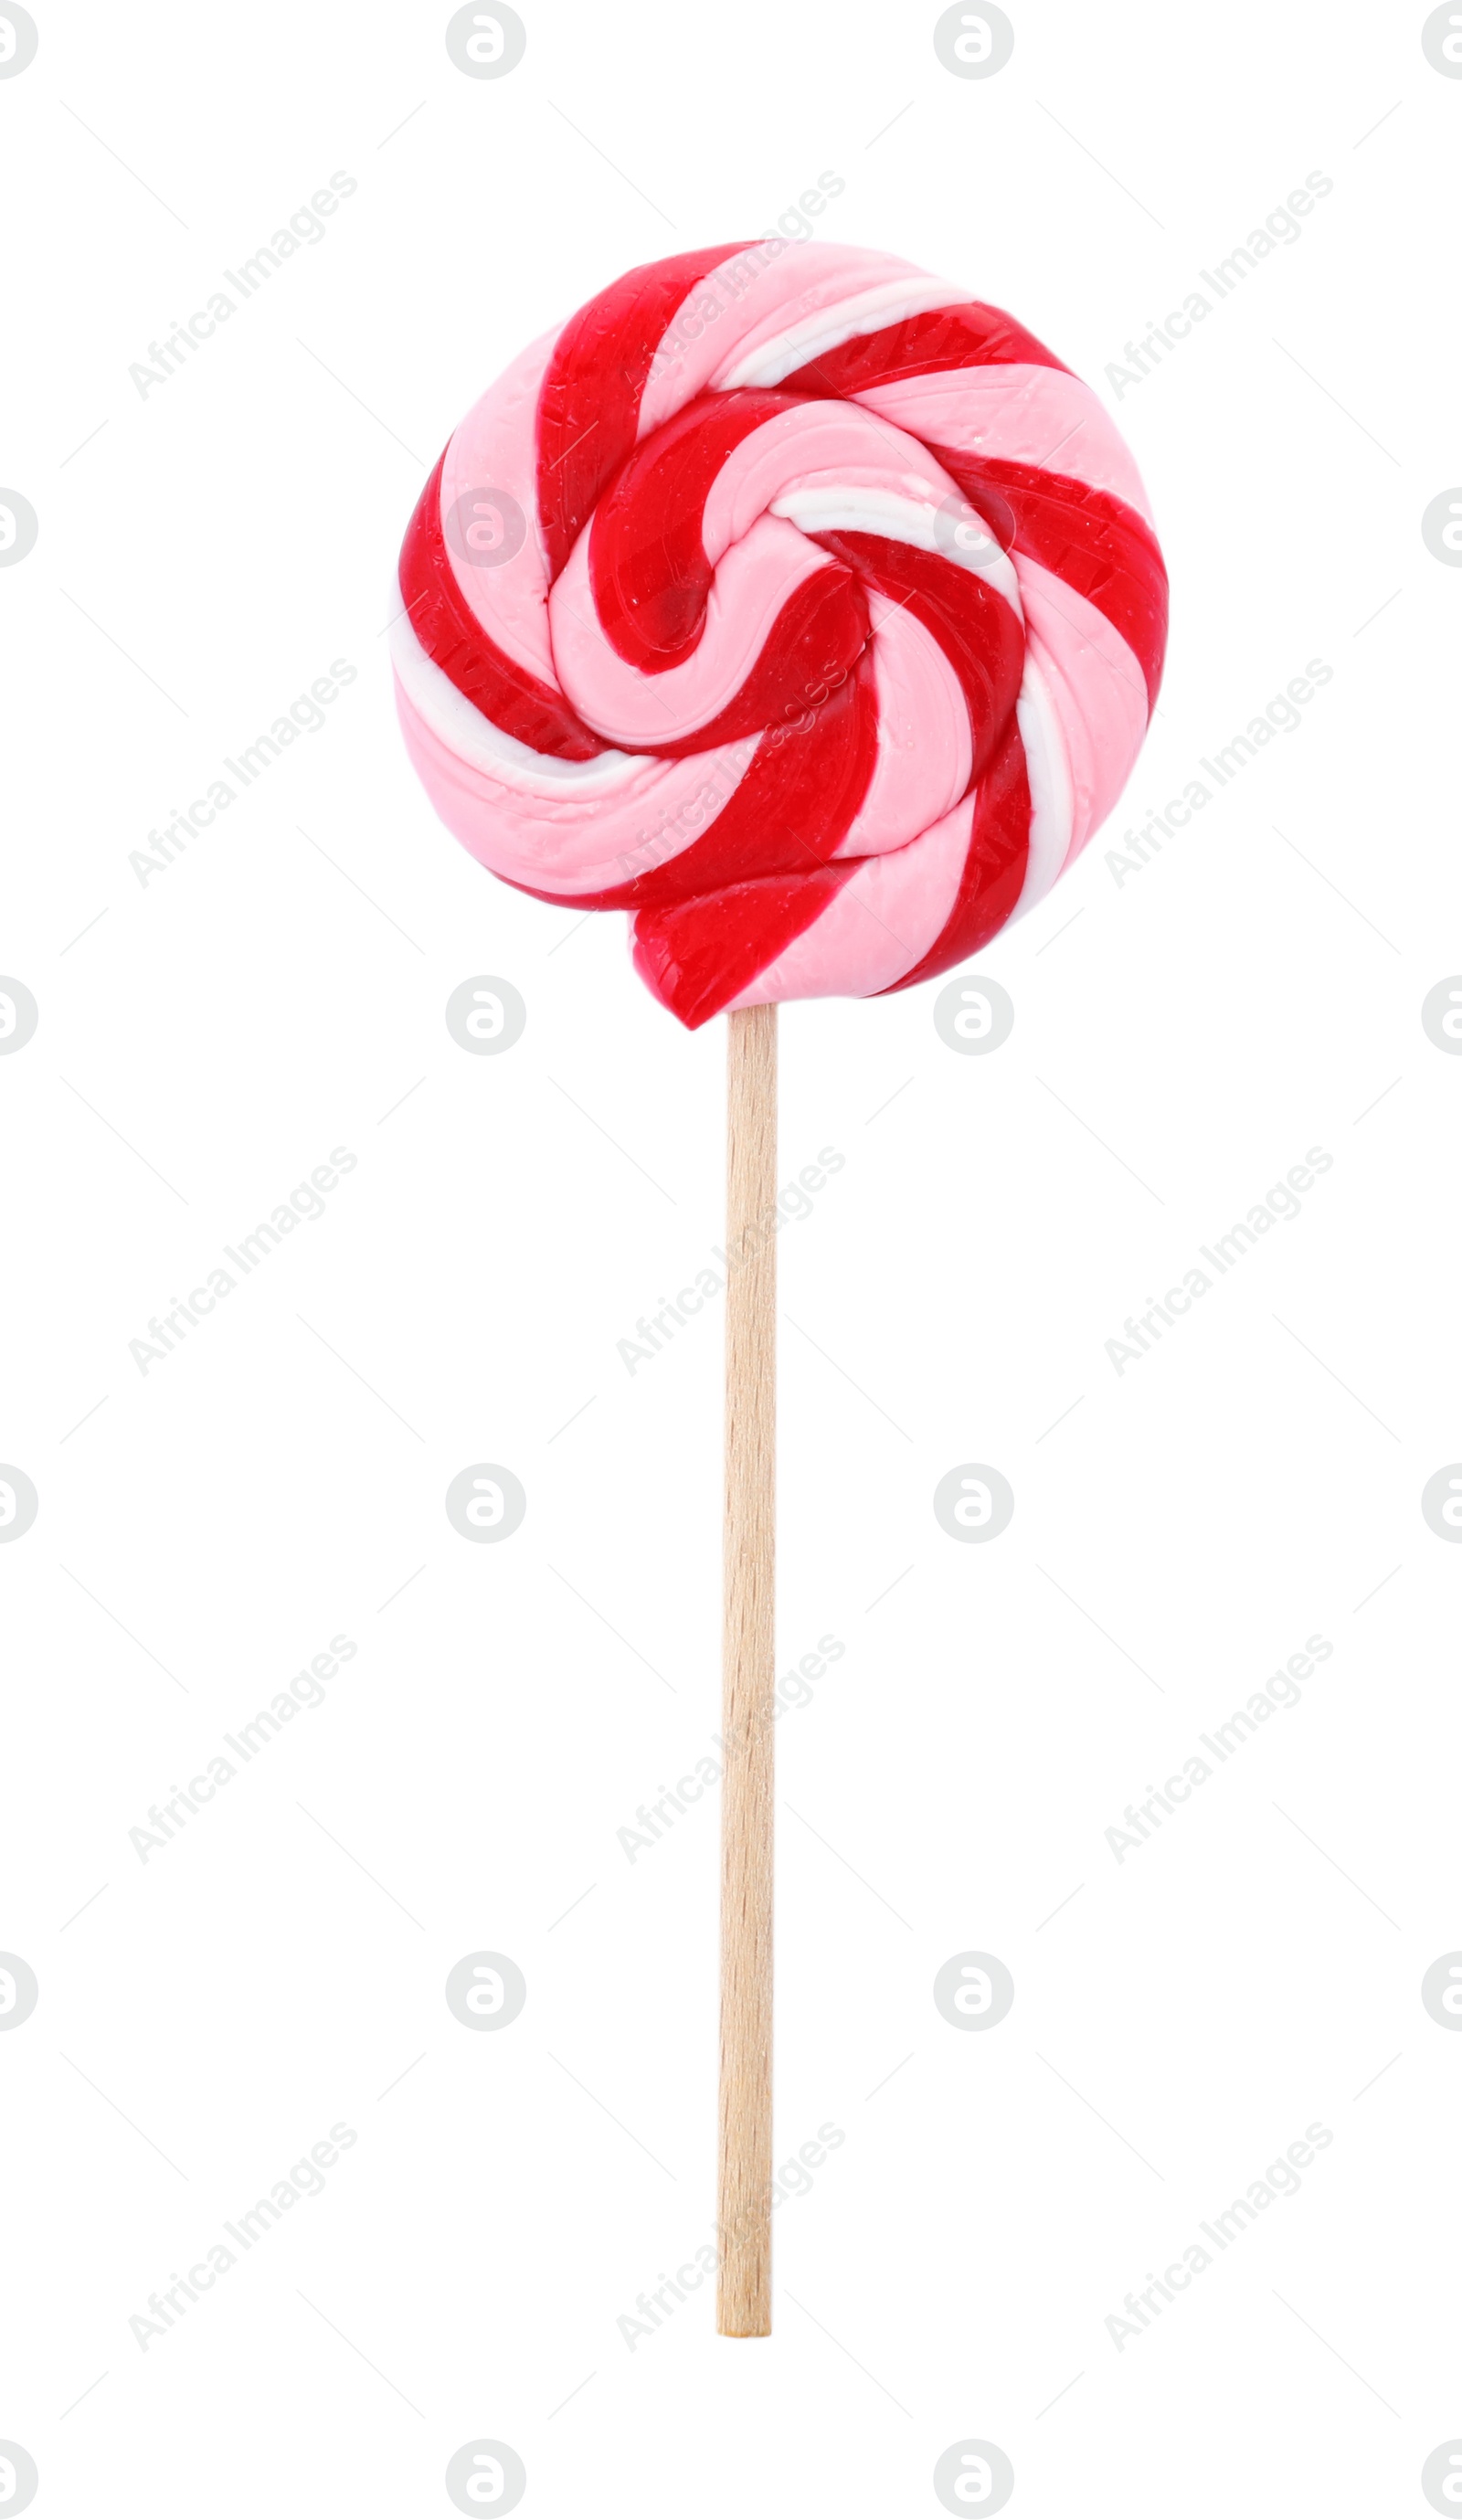 Photo of Tasty colorful fruit flavored candy on white background